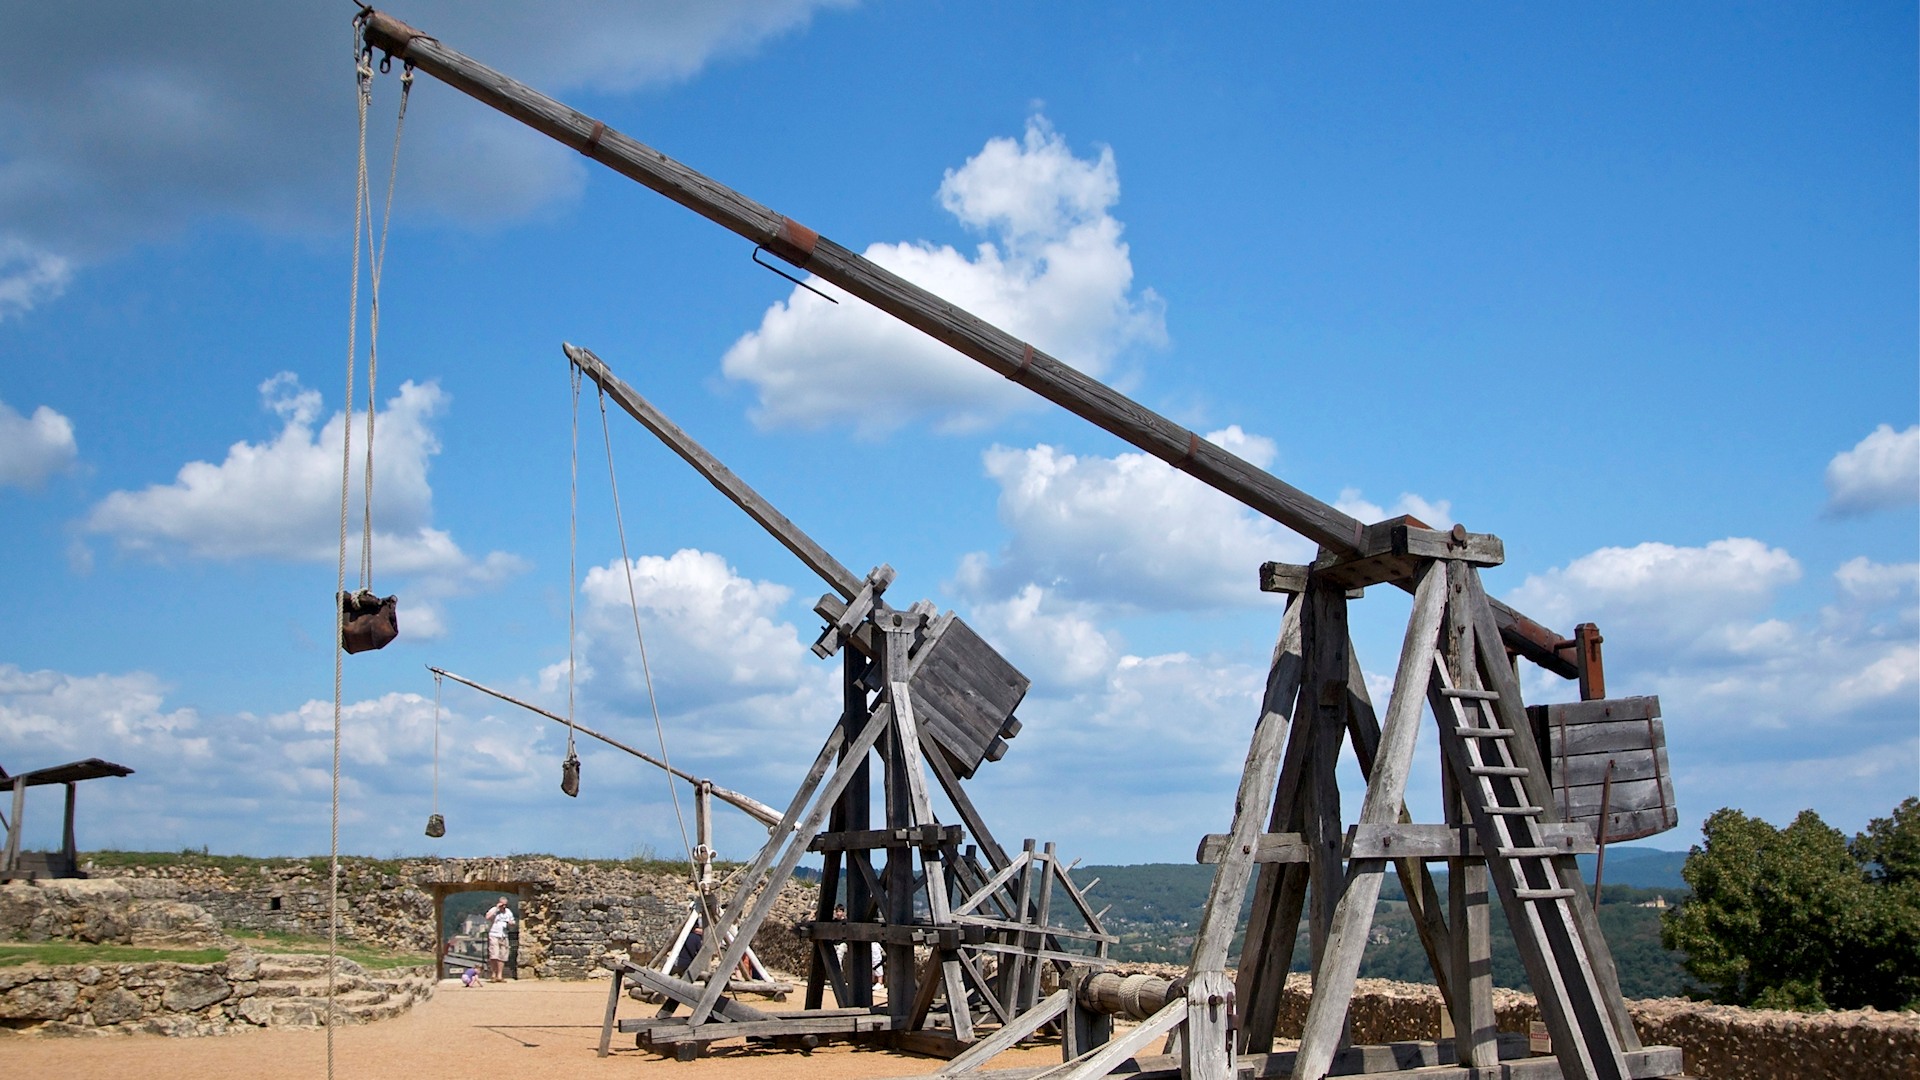 The largest trebuchet ever built: Warwolf in the Siege of Stirling